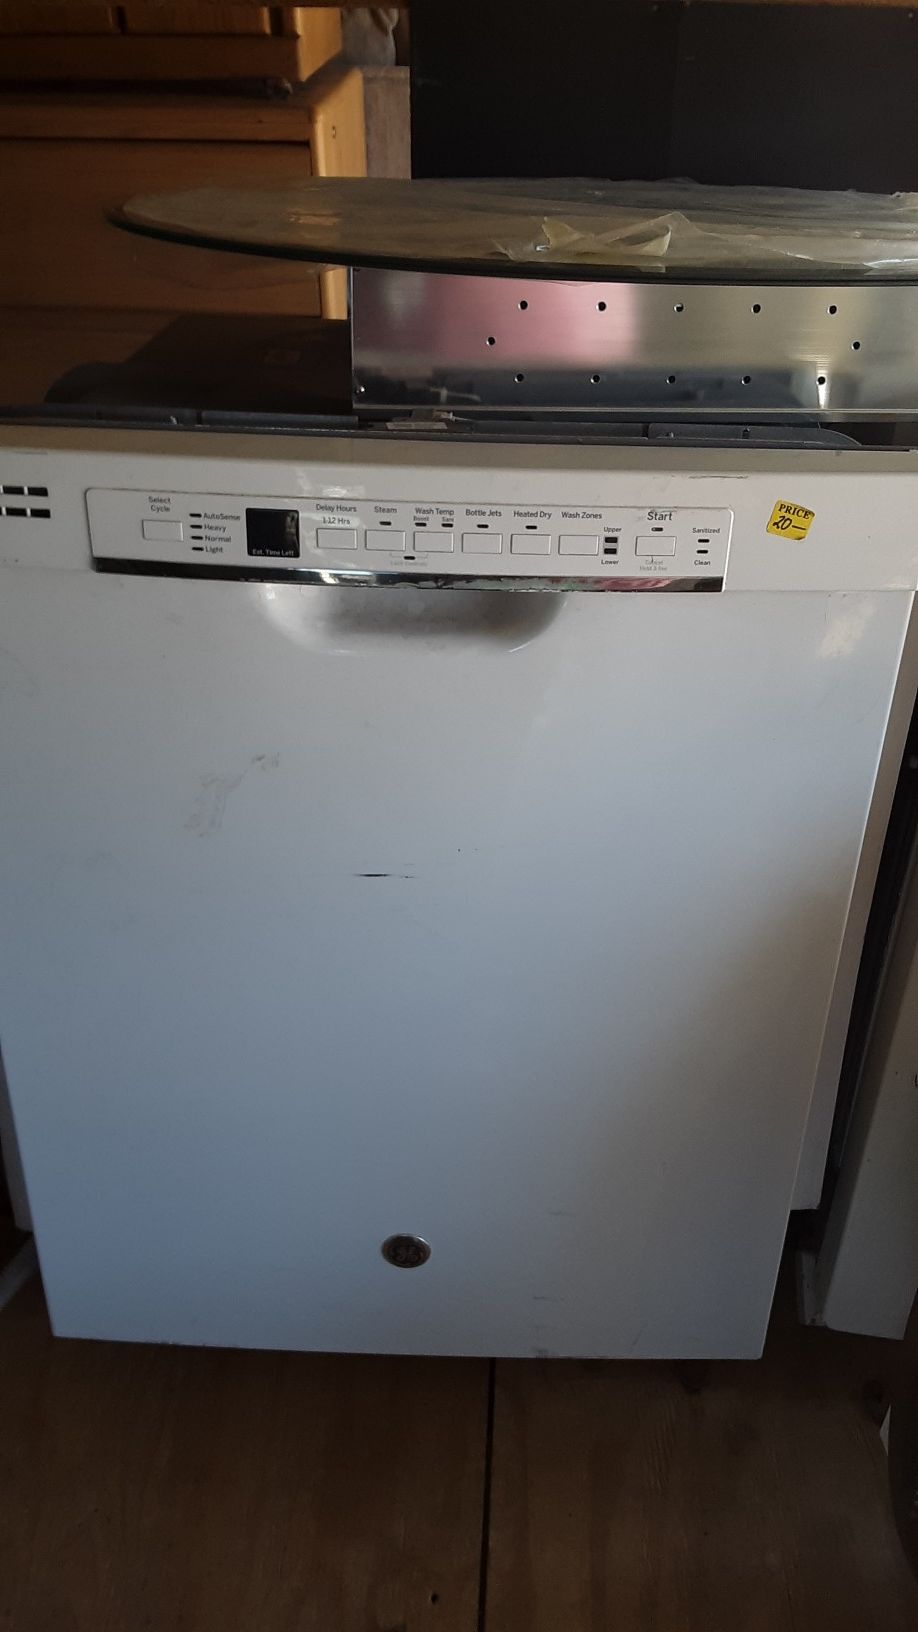 We have dishwashers for sale